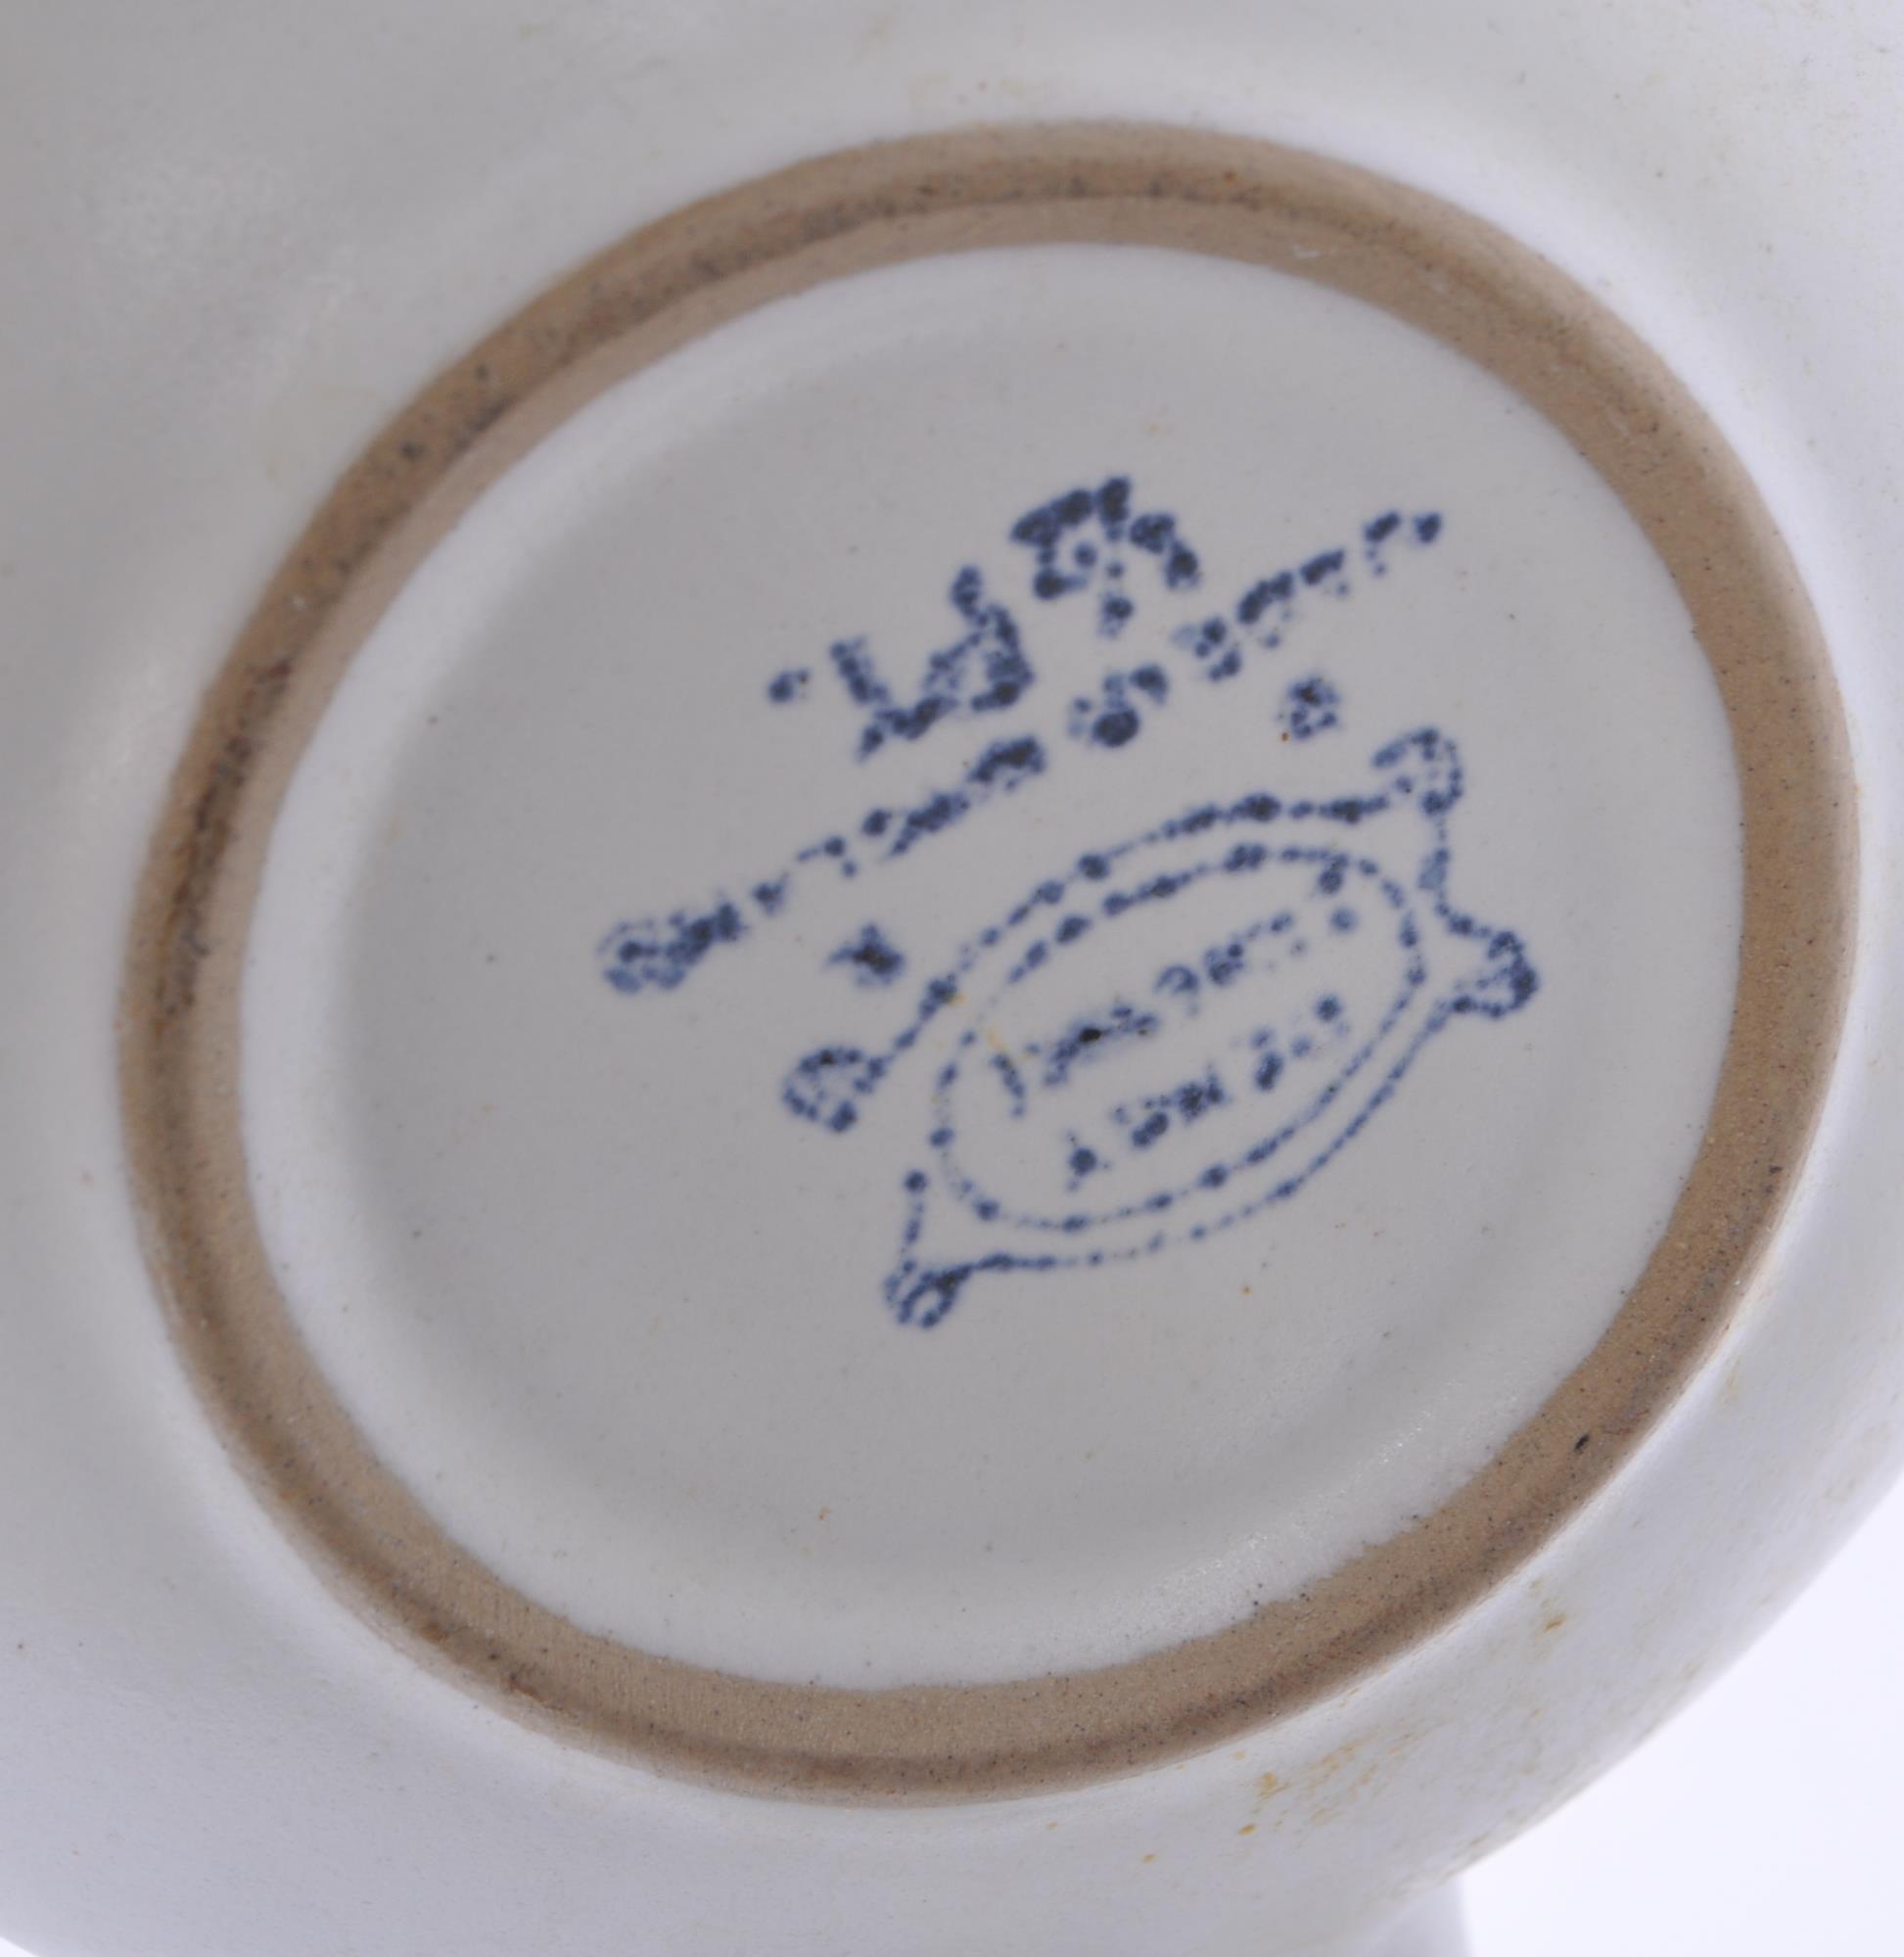 COLLECTION OF VINTAGE DENBY STONEWARE POTTERY - Image 9 of 10